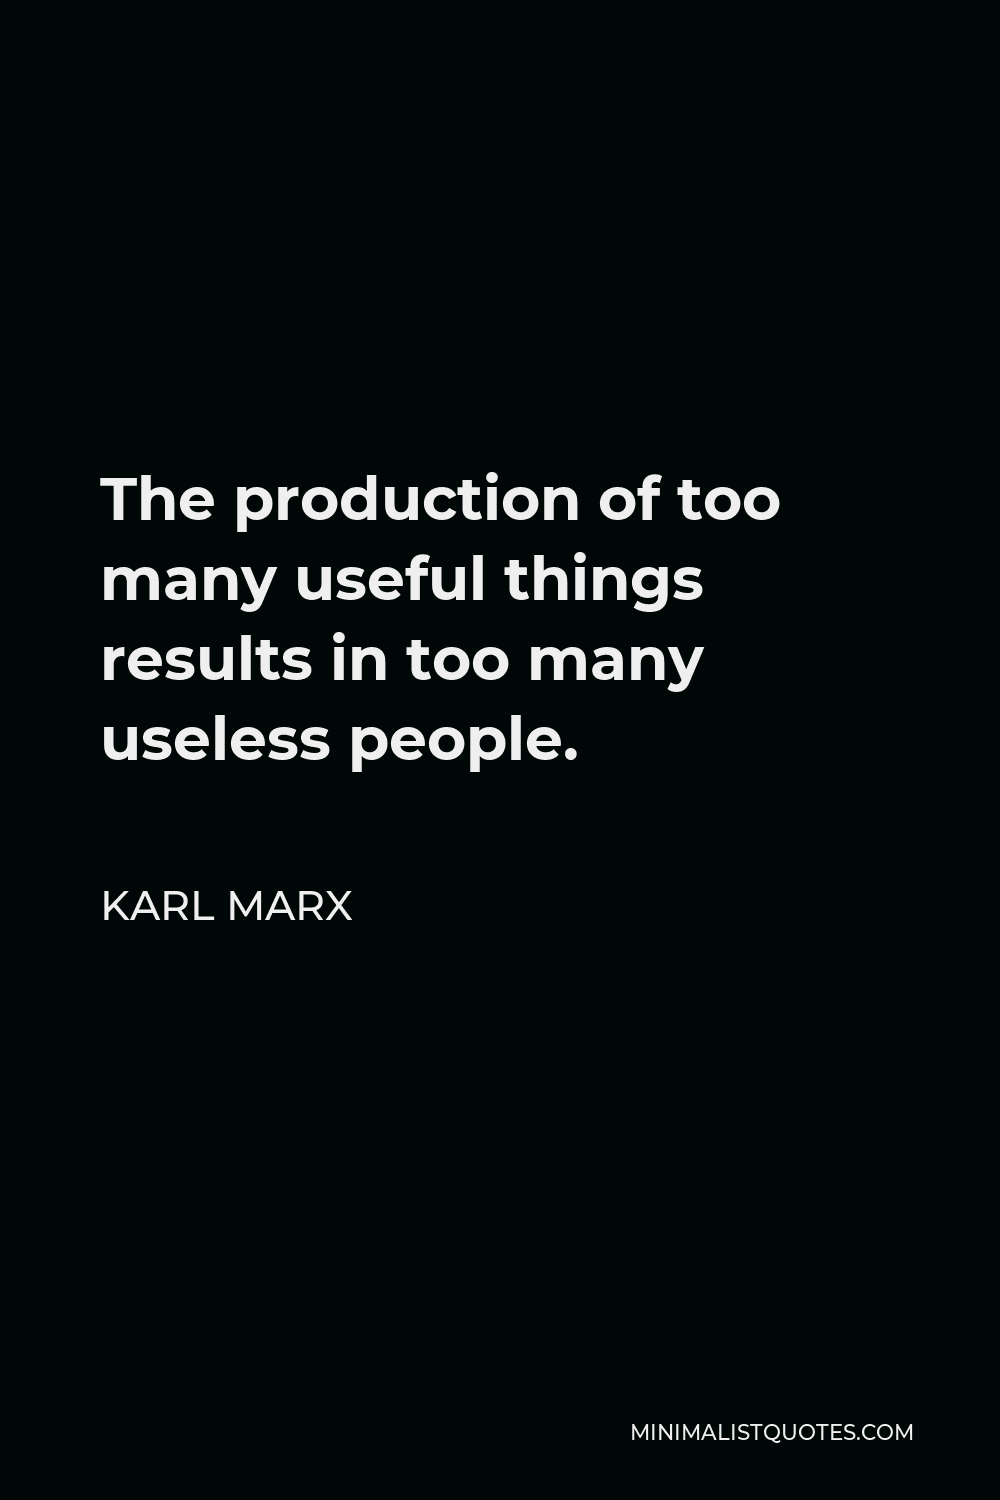 Karl Marx Quote - The production of too many useful things results in too many useless people.